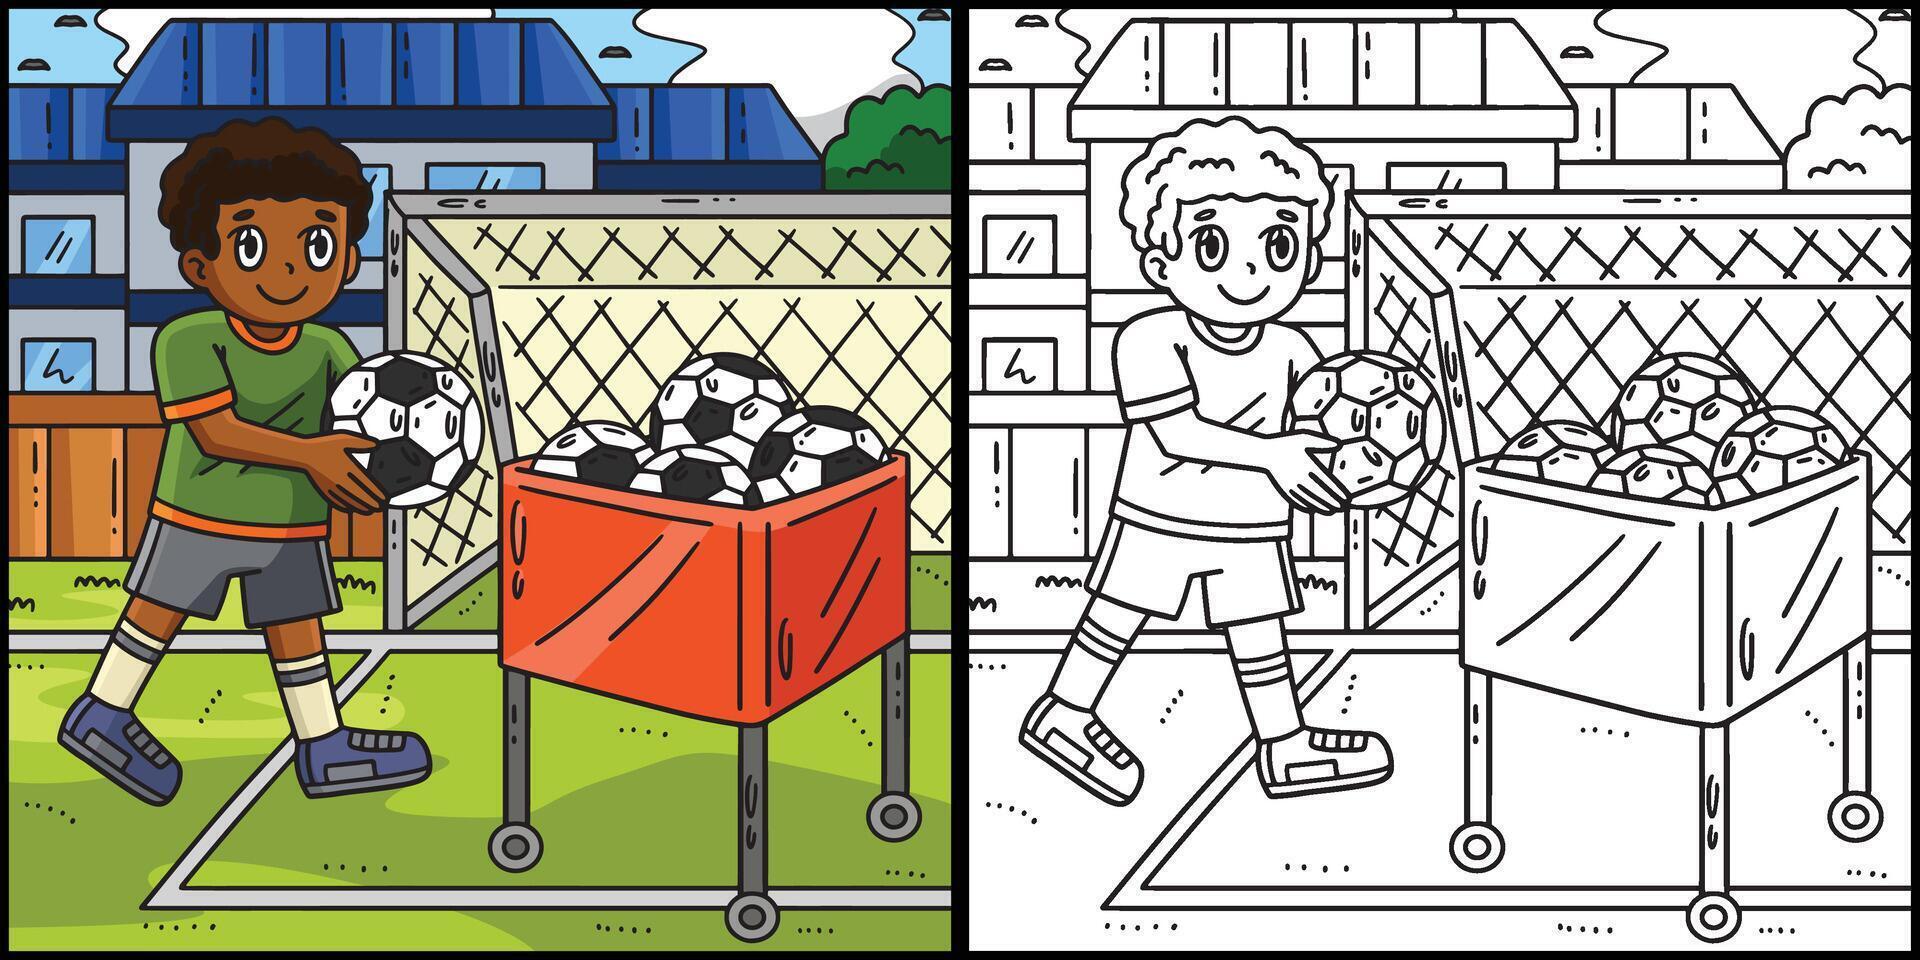 Boy with Soccer Ball Cart Coloring Illustration vector